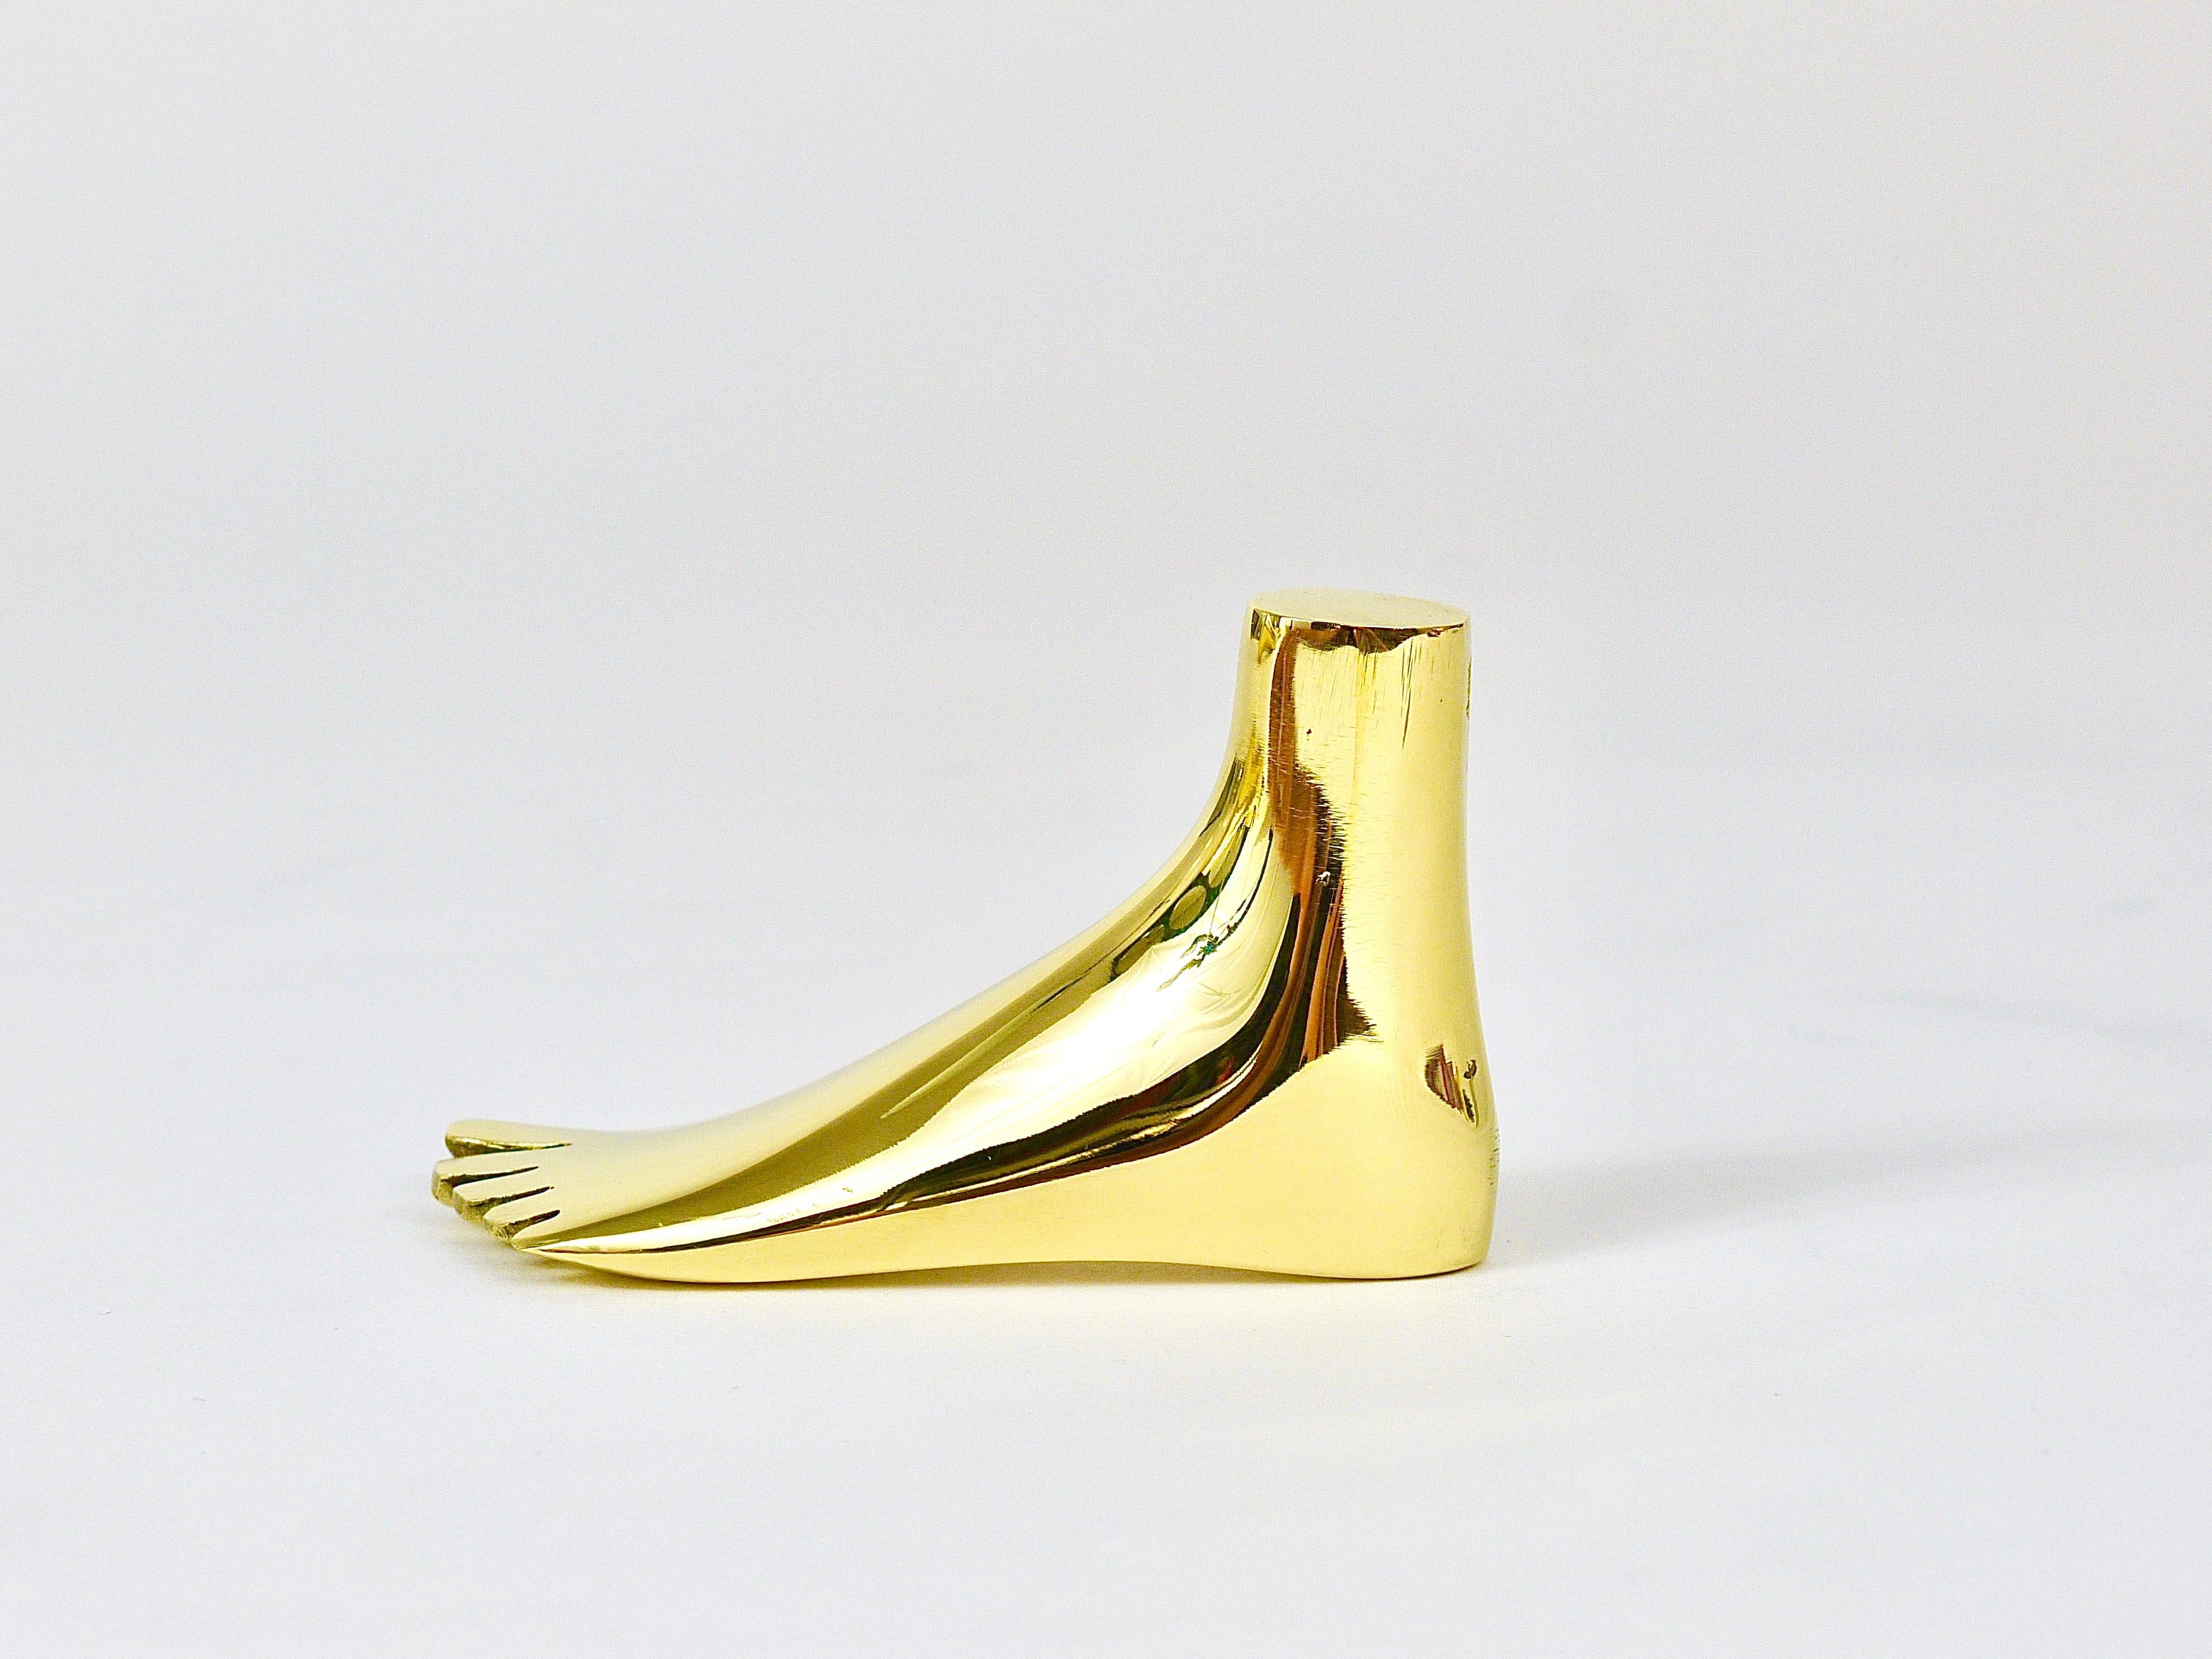 20th Century Signed Carl Auböck Midcentury Brass Foot Paperweight Handmade Sculpture For Sale